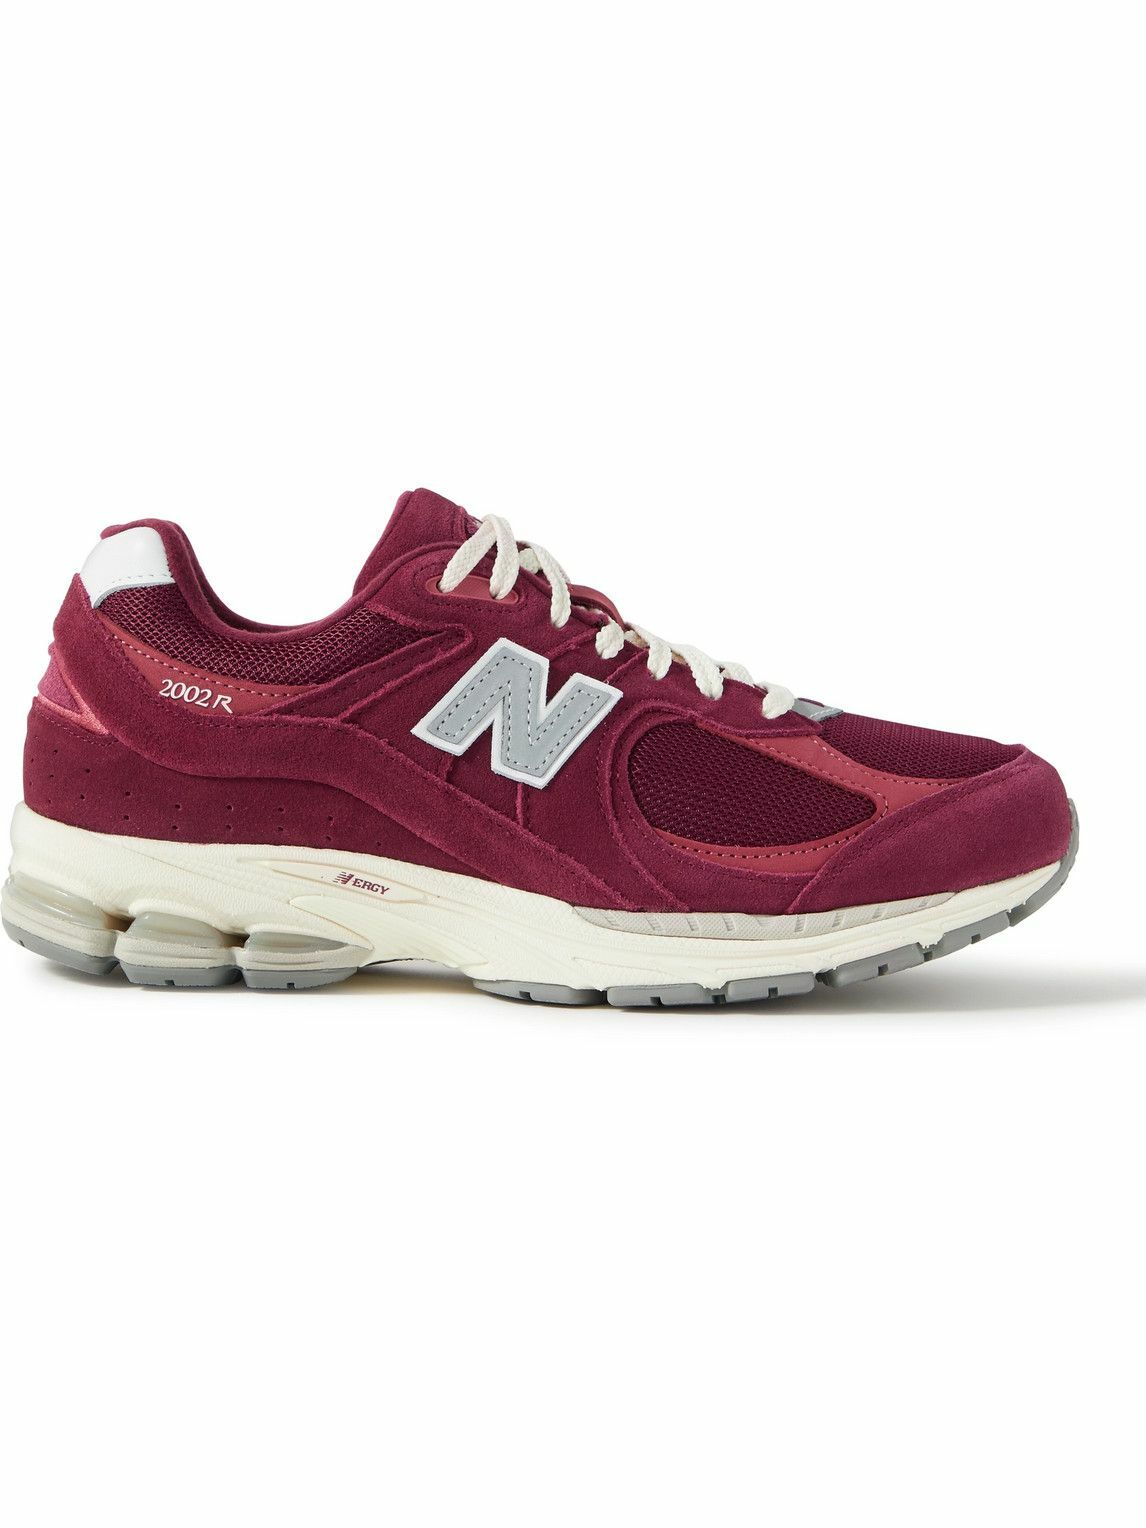 New Balance - 2002R Leather-Trimmed Suede and Mesh Sneakers - Burgundy